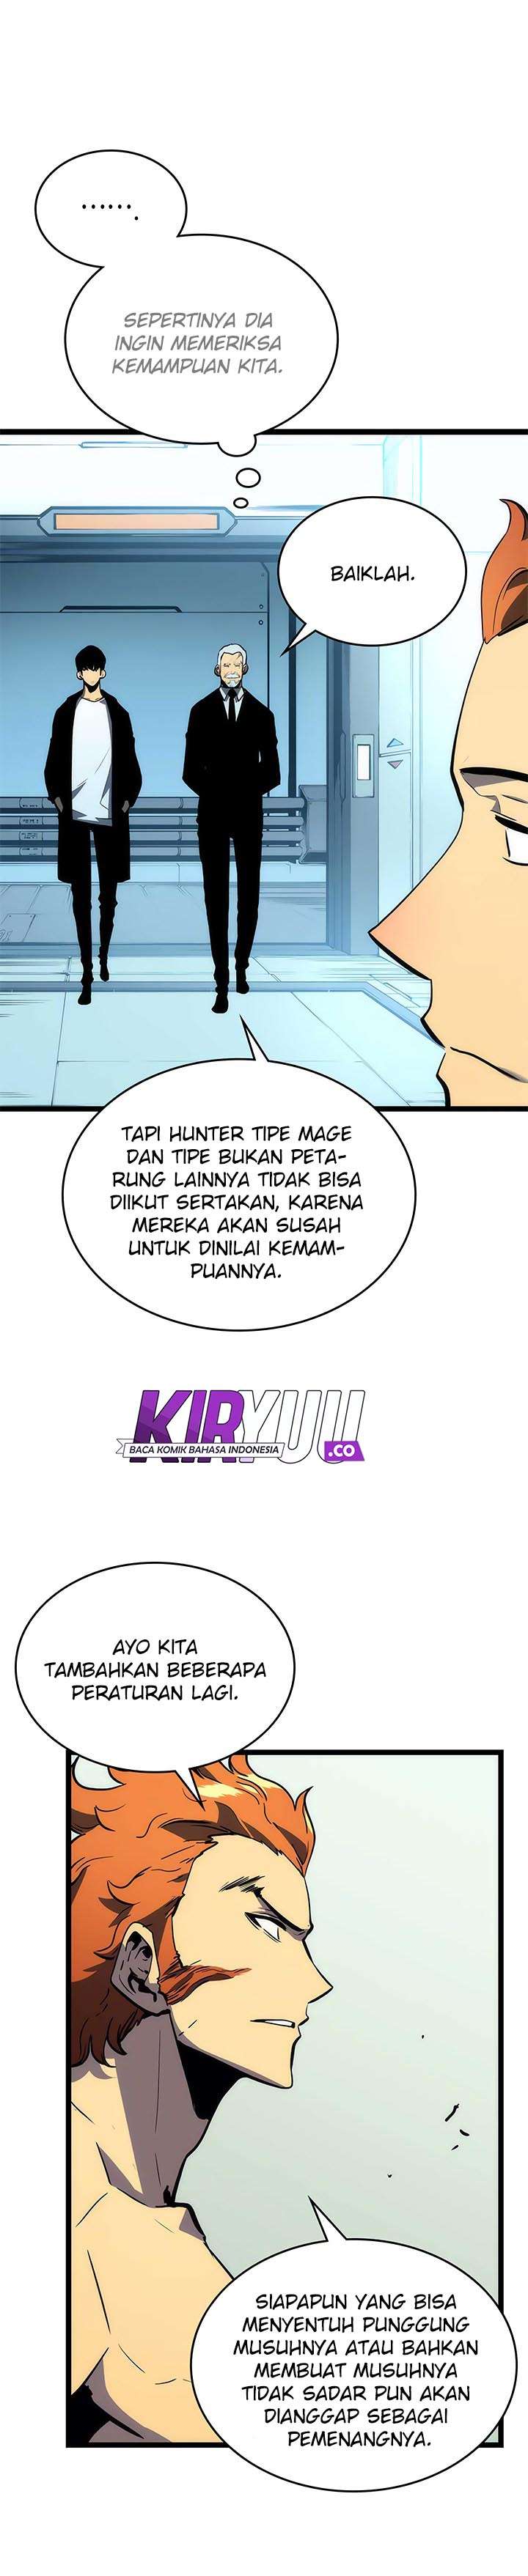 Solo Leveling Chapter 91 Image 21